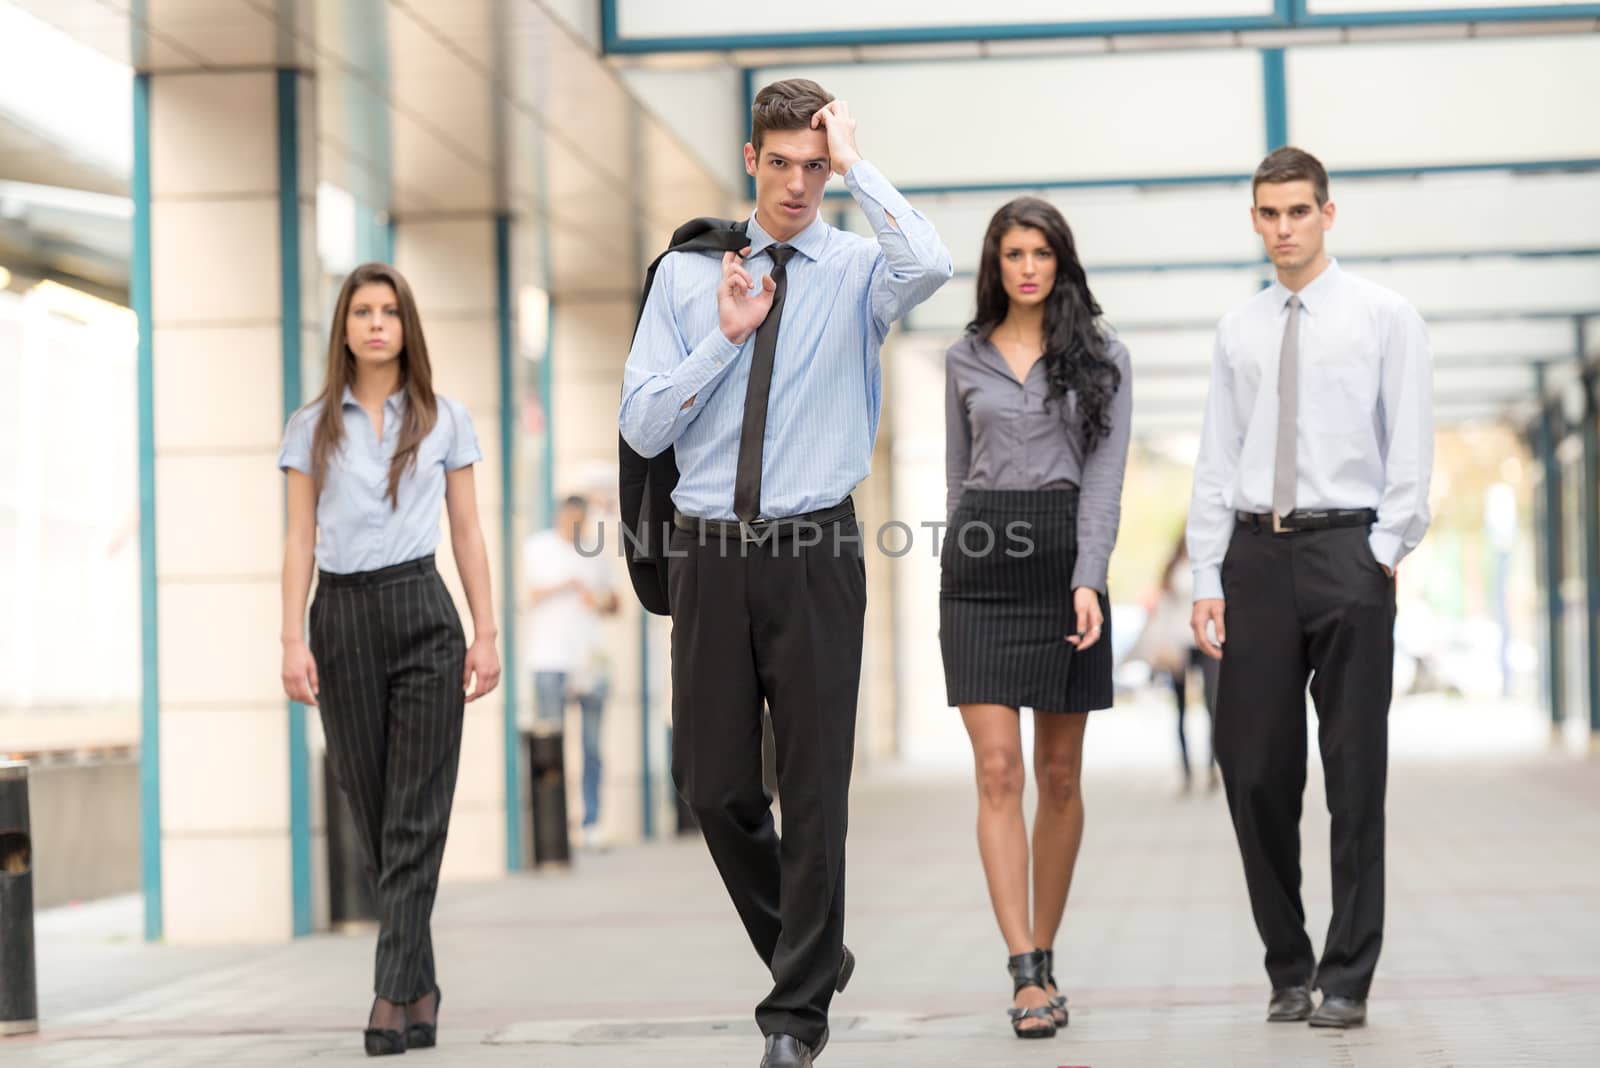 A small group of young business people, elegantly dressed, pass through the passage office building, looking at the camera with serious expressions on their faces